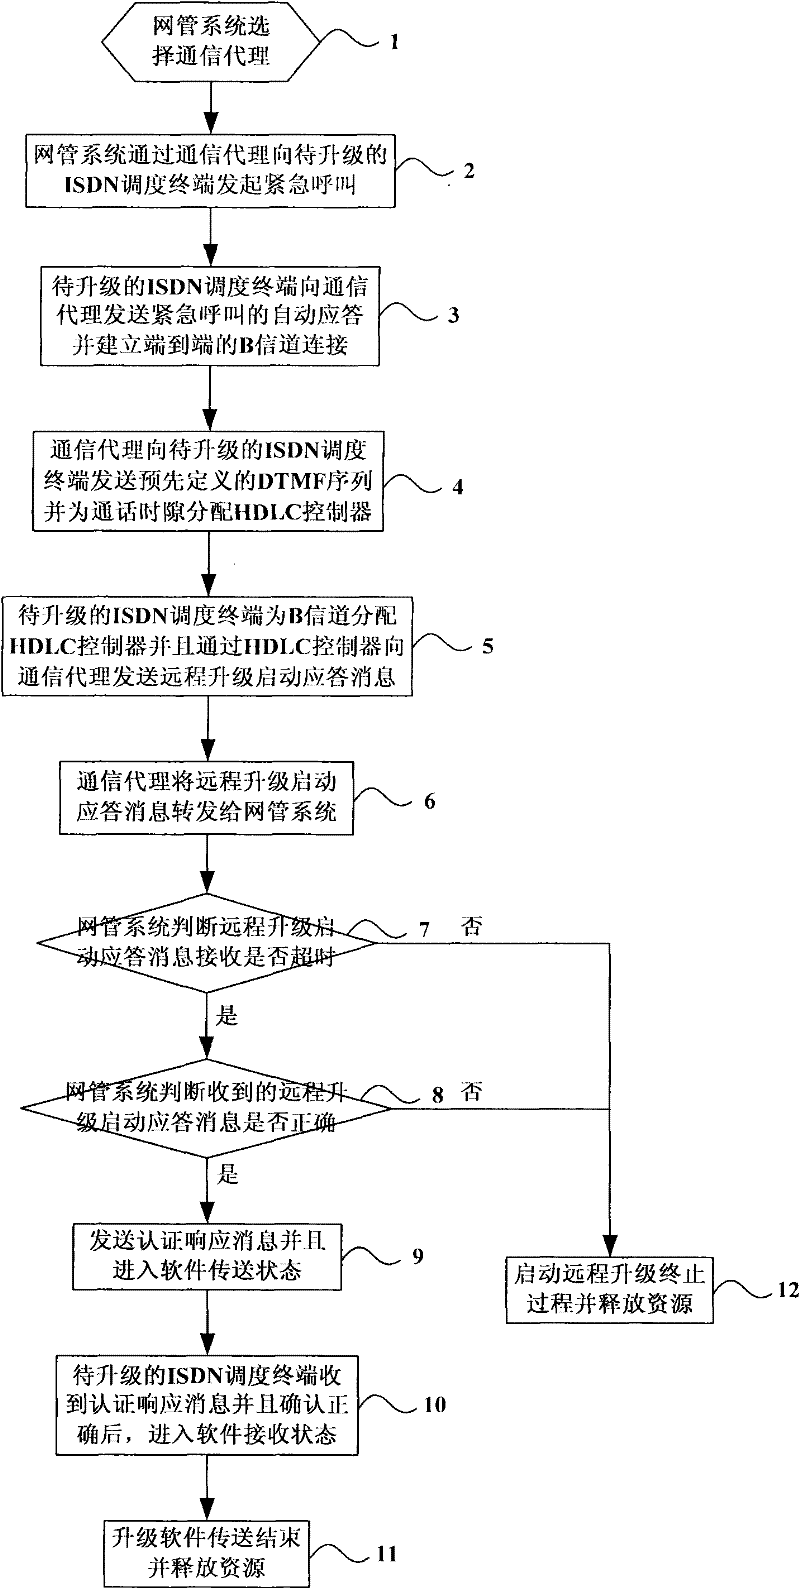 Method for realizing ISDN dispatching terminal long-distance software upgrade across dispatching communication networks